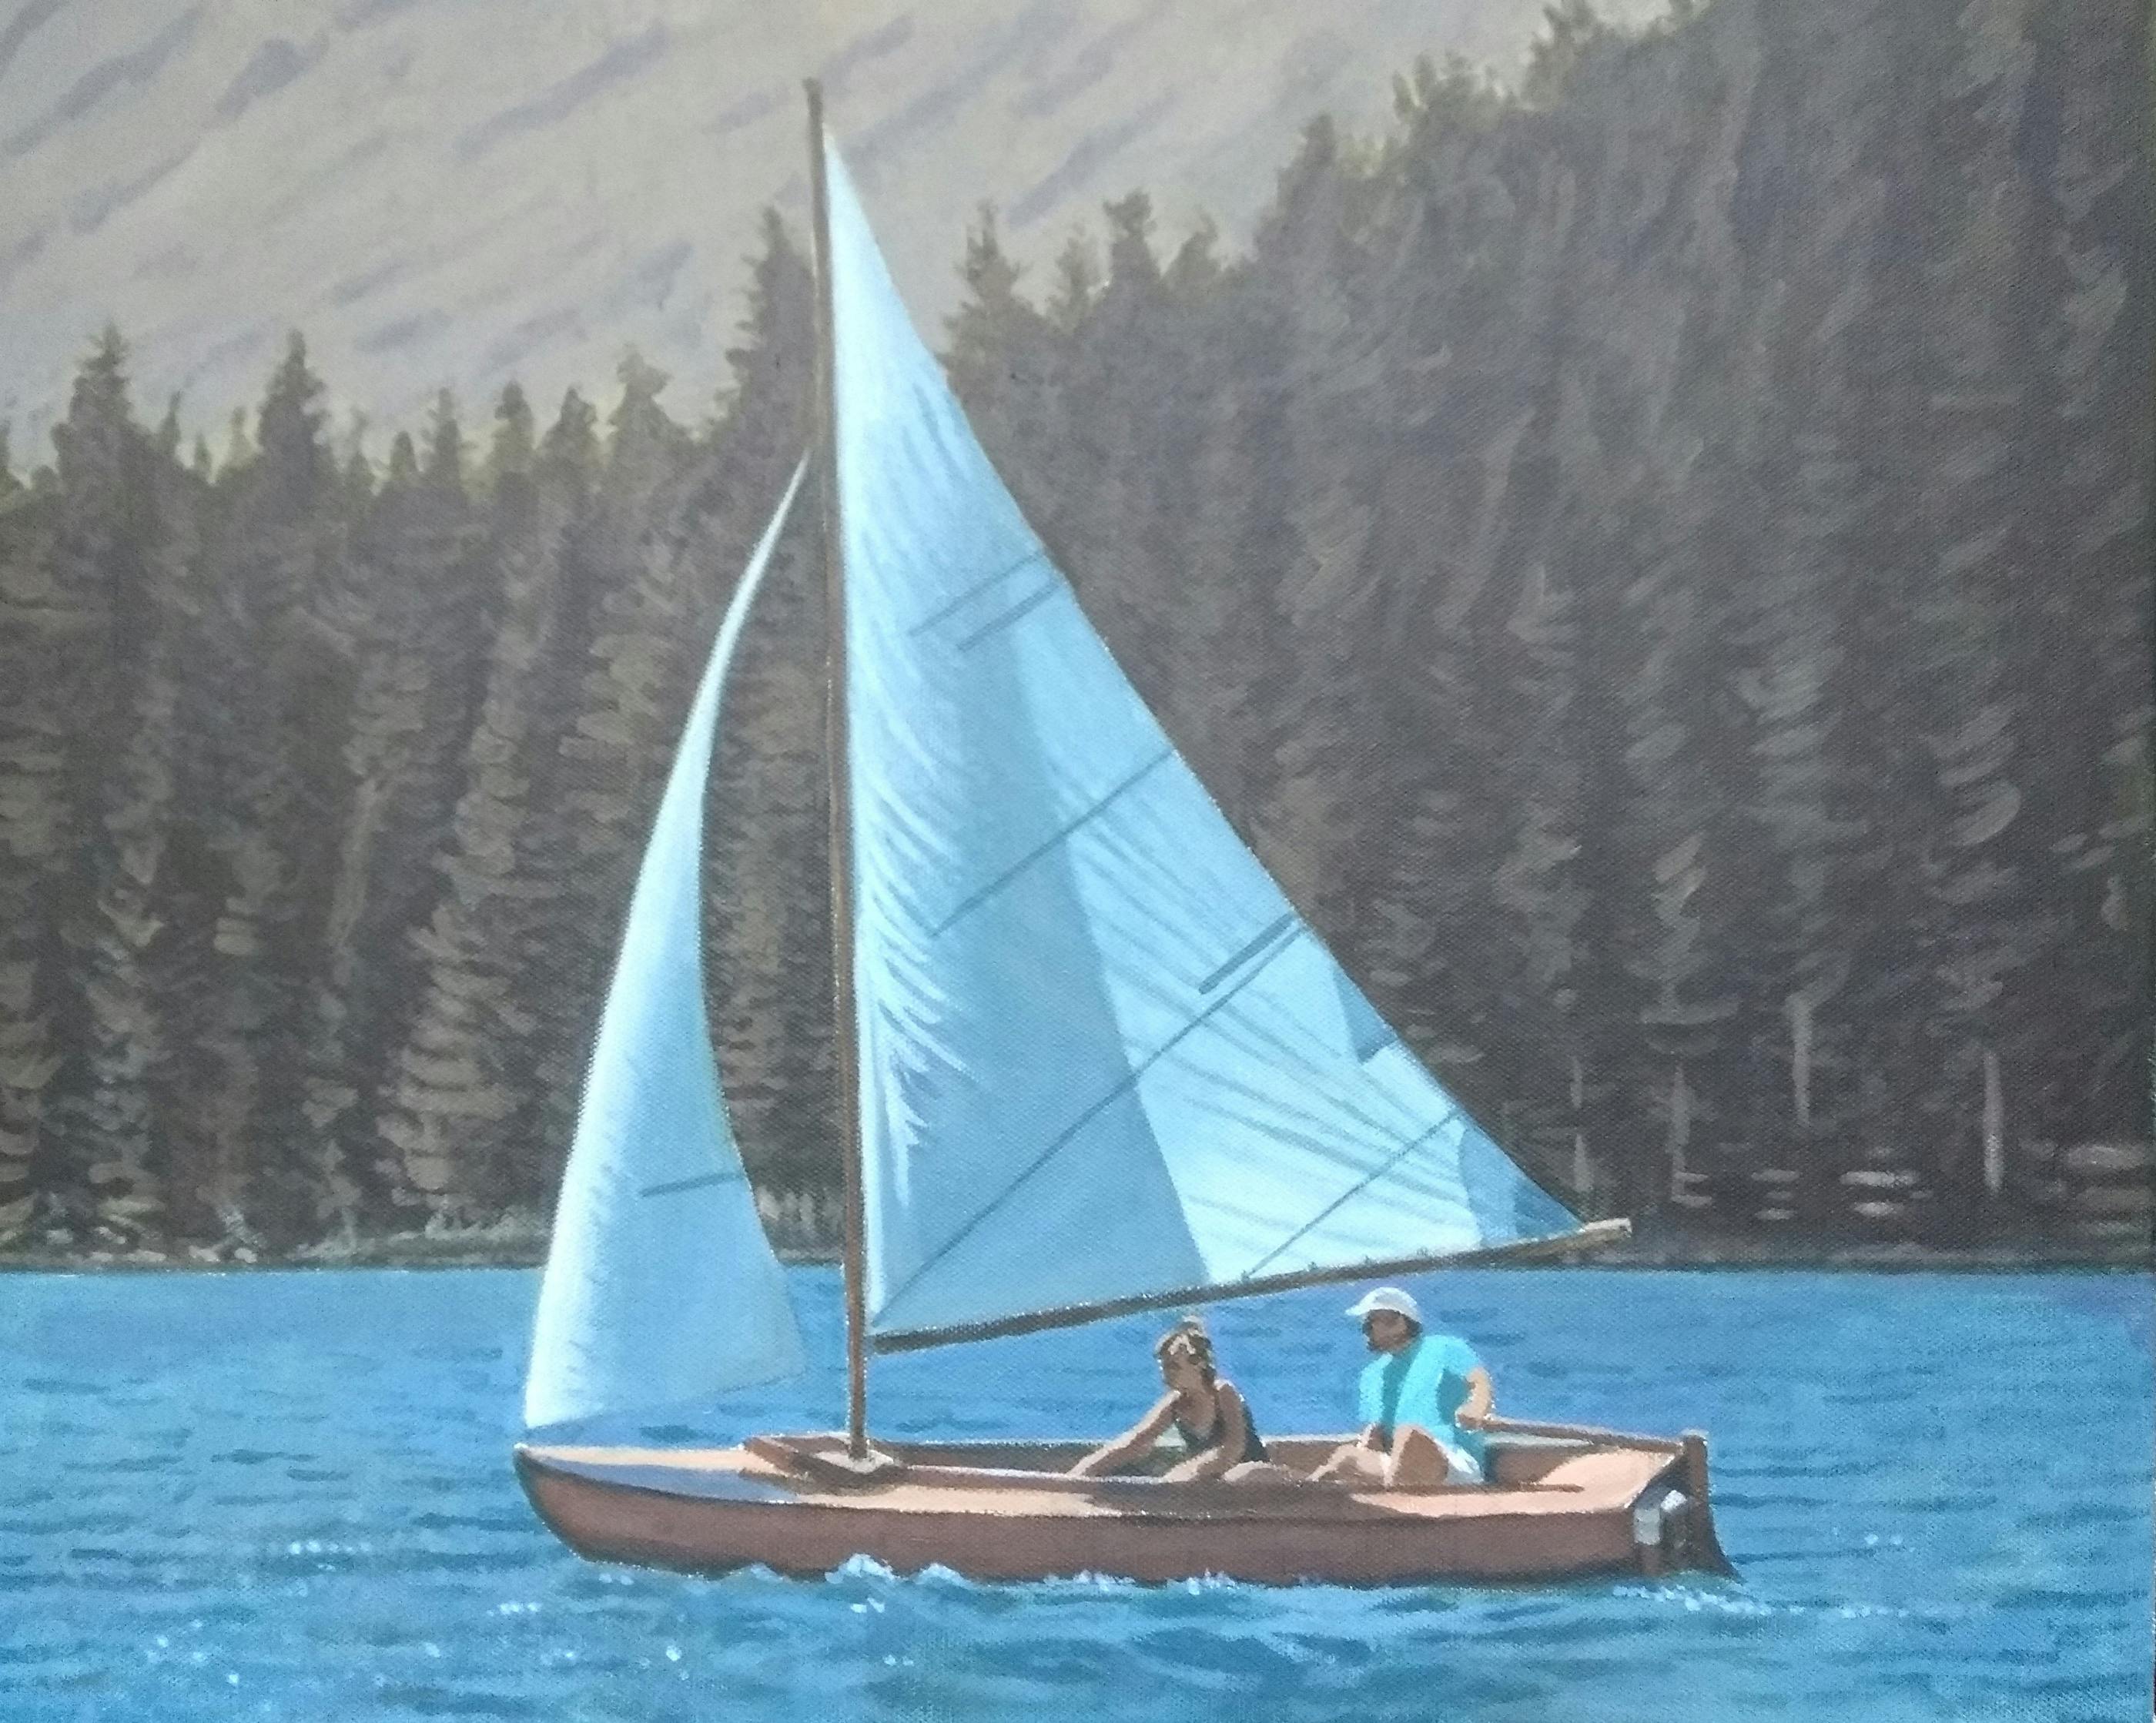 A painting of a sailing boat on a lake with two figures inside and pine trees in the background